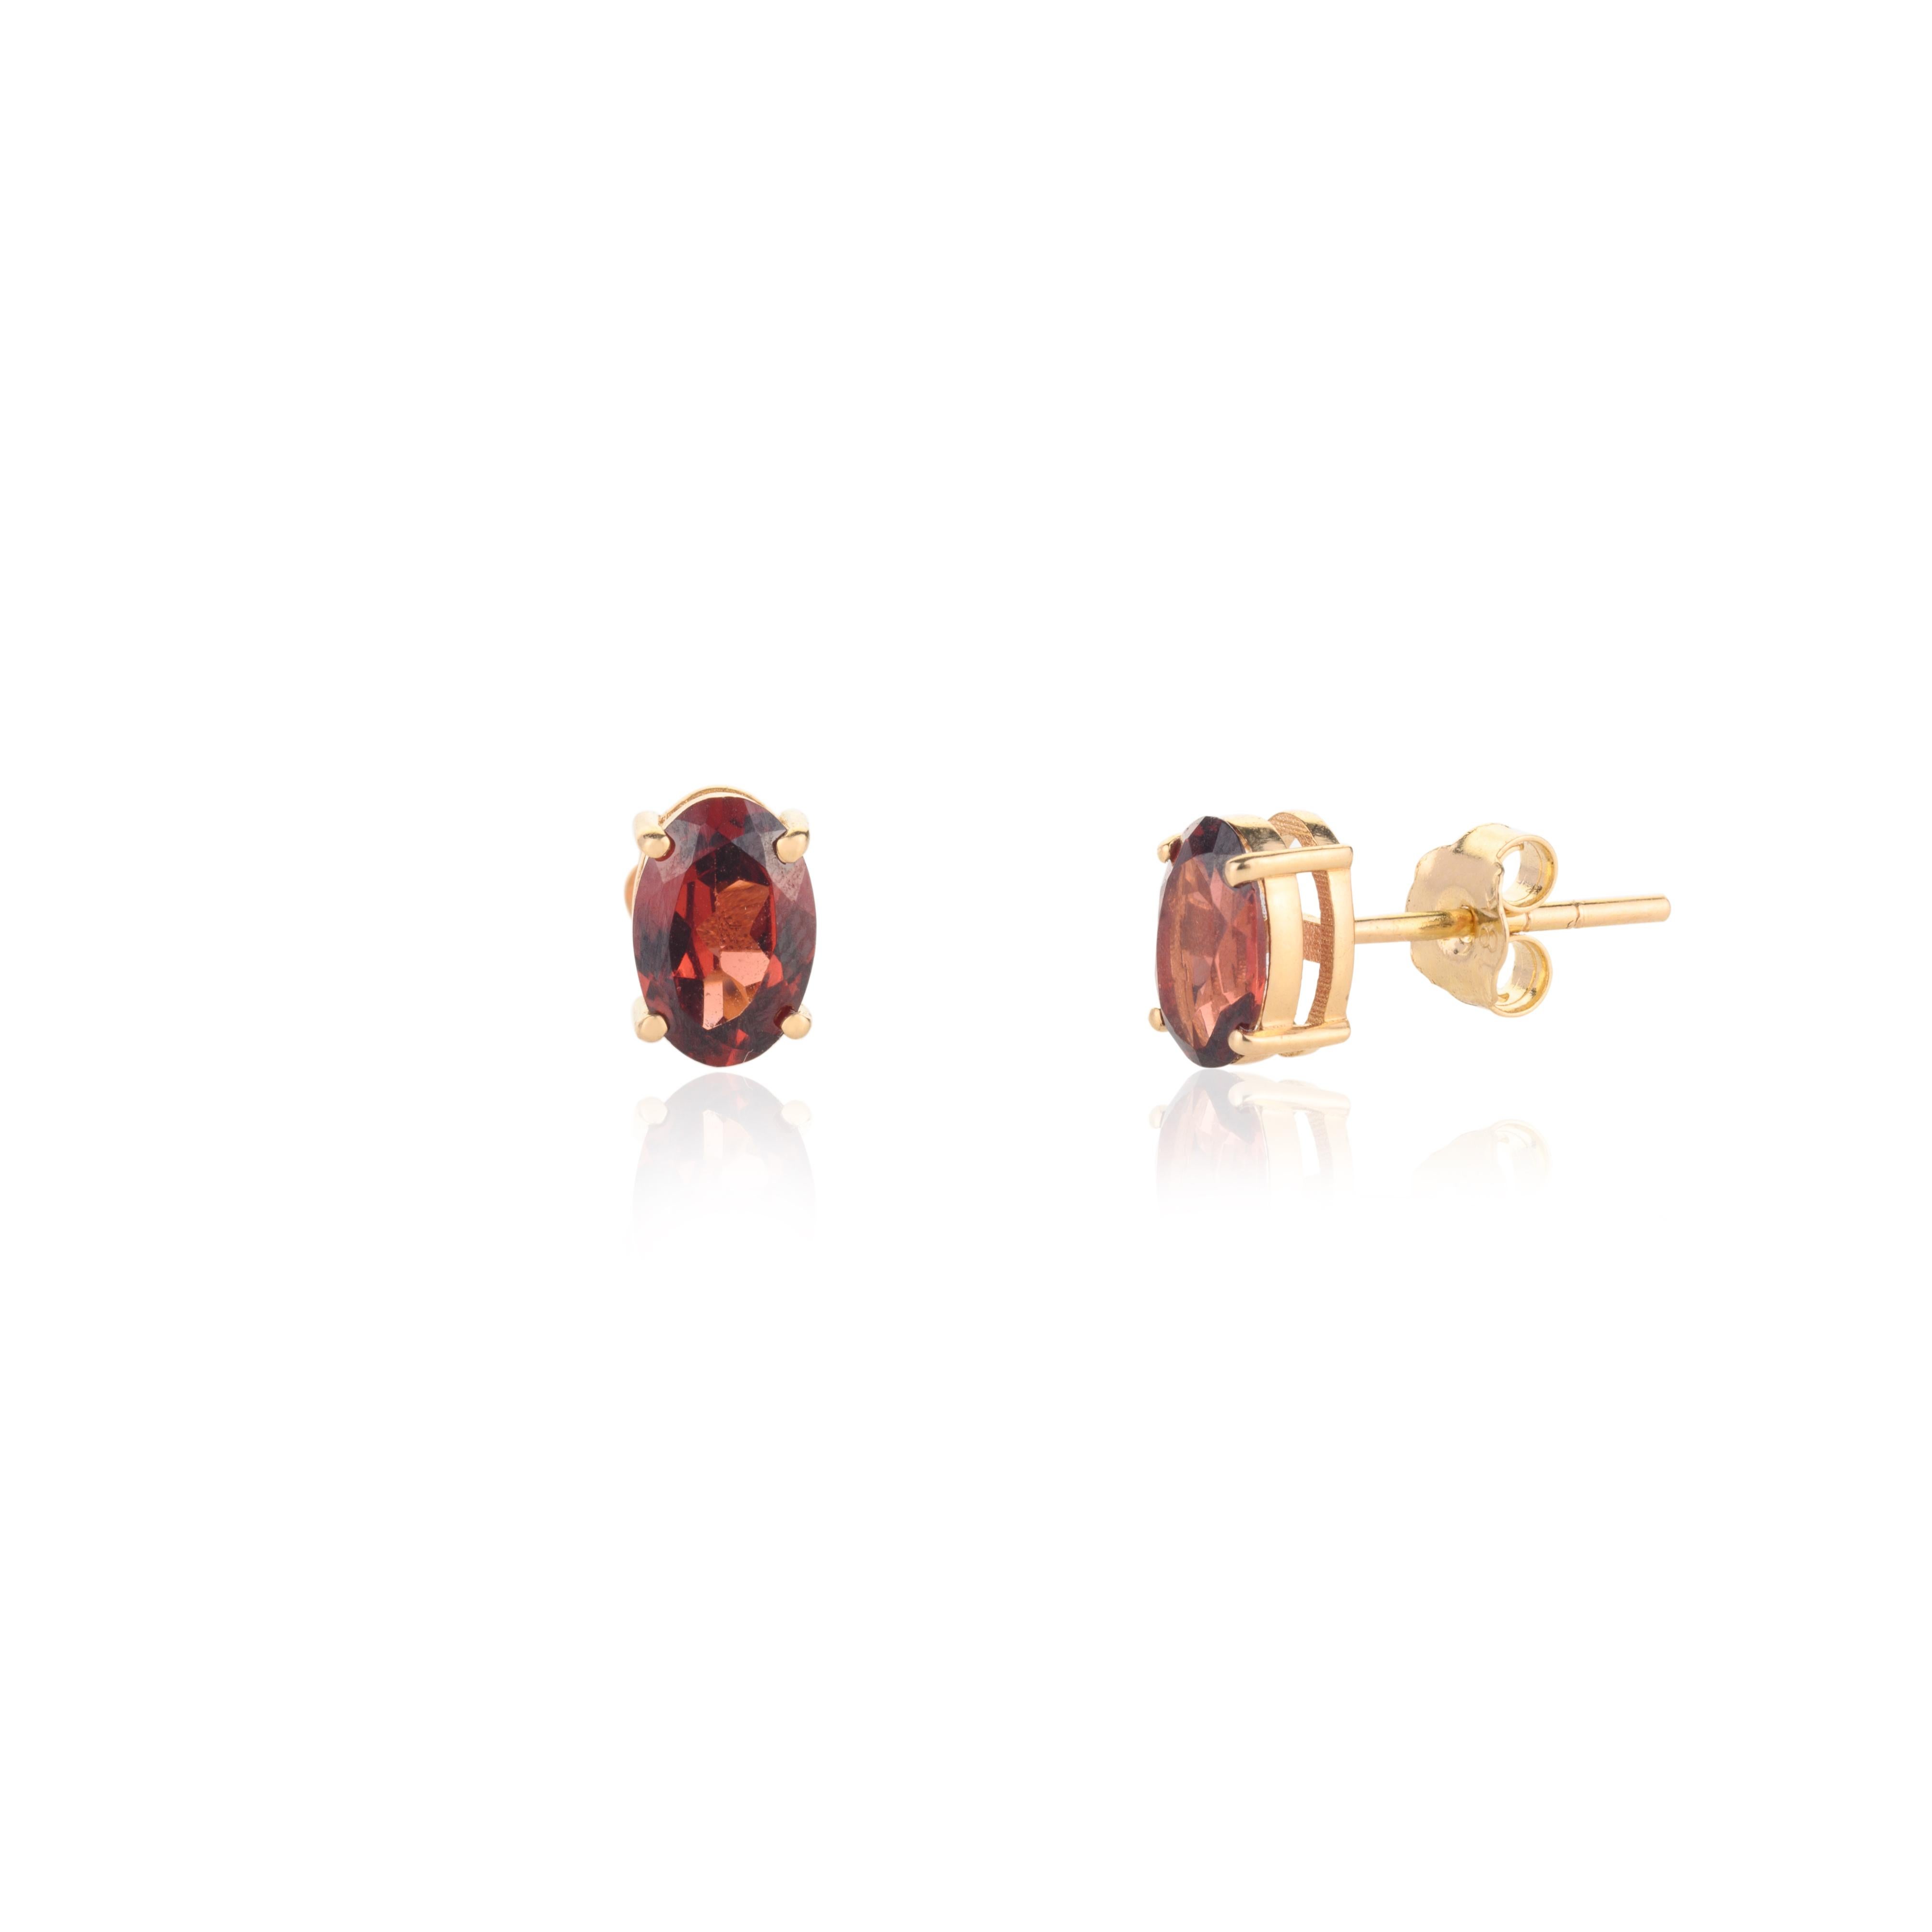 For Sale:  18k Solid Yellow Gold Handmade Garnet Ring, Earrings and Pendant Jewelry Set 12